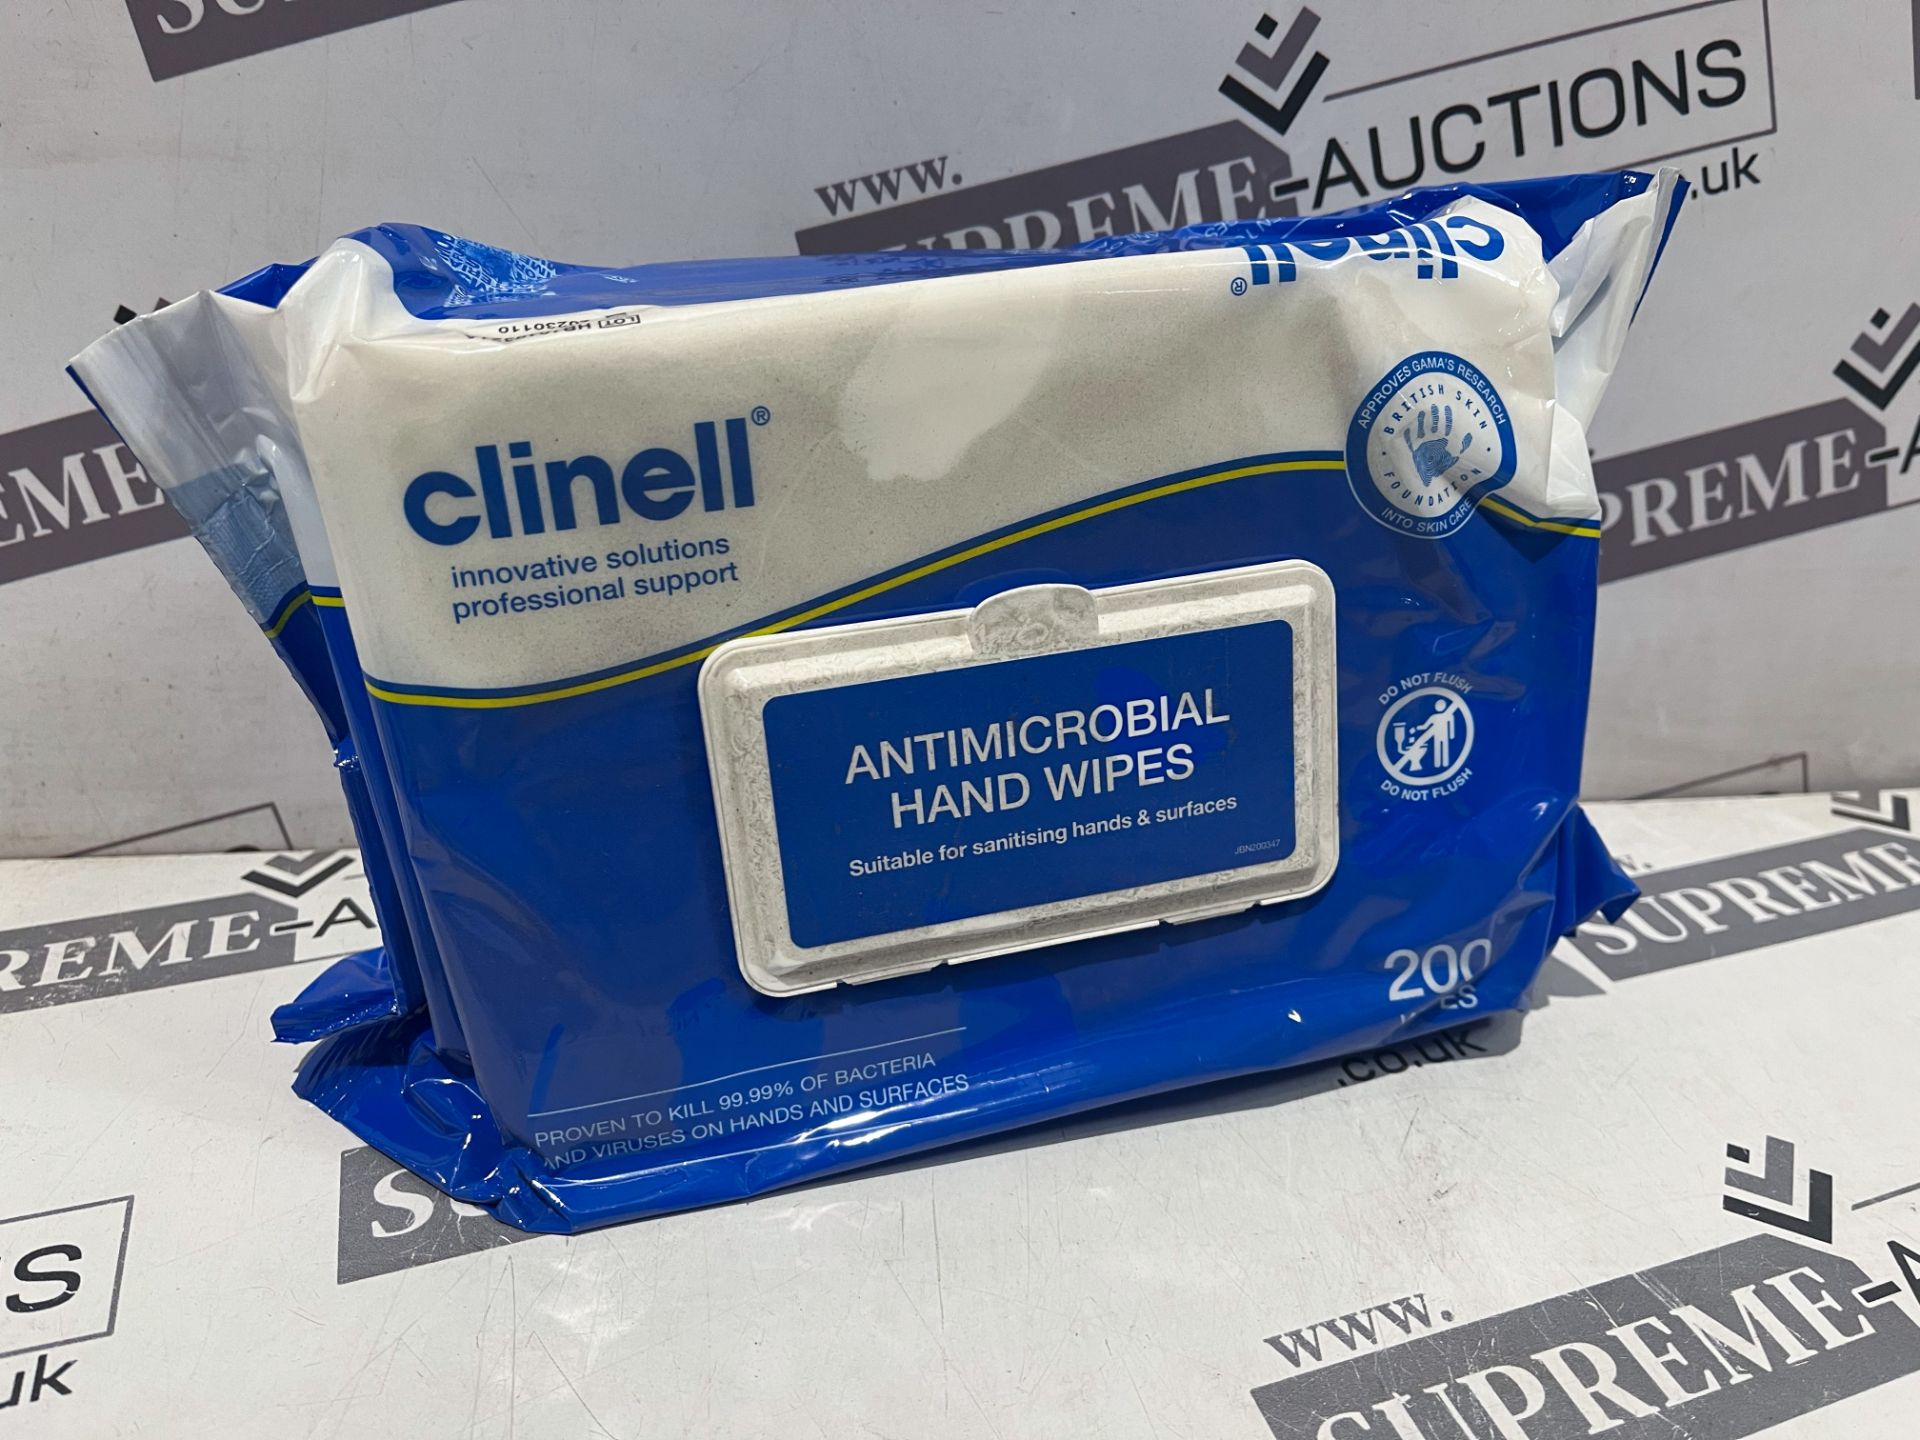 30 X BRAND NEW PACKS OF 200 CLINELL ANTIMICROBIAL HAND WIPES USE BY OCT 2023 R6-6